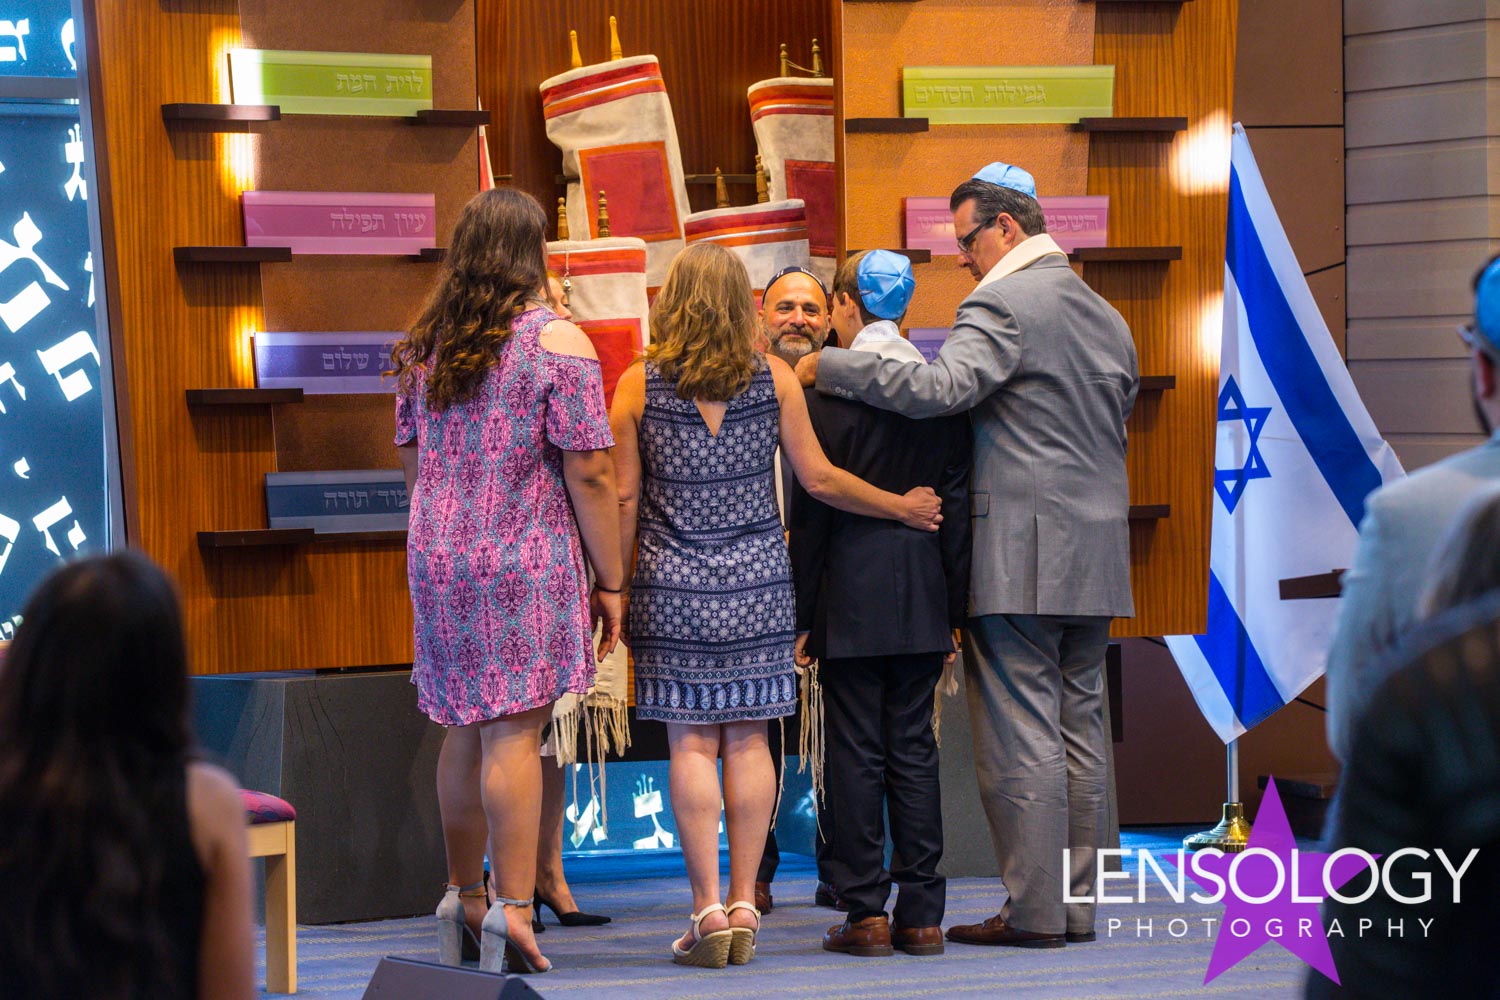 LENSOLOGY.NET - Riley G bar mitzvah ceremony, LA, CA.
All images are copyright of Lensology.net
Email: info@lensology.net
www.lensology.net